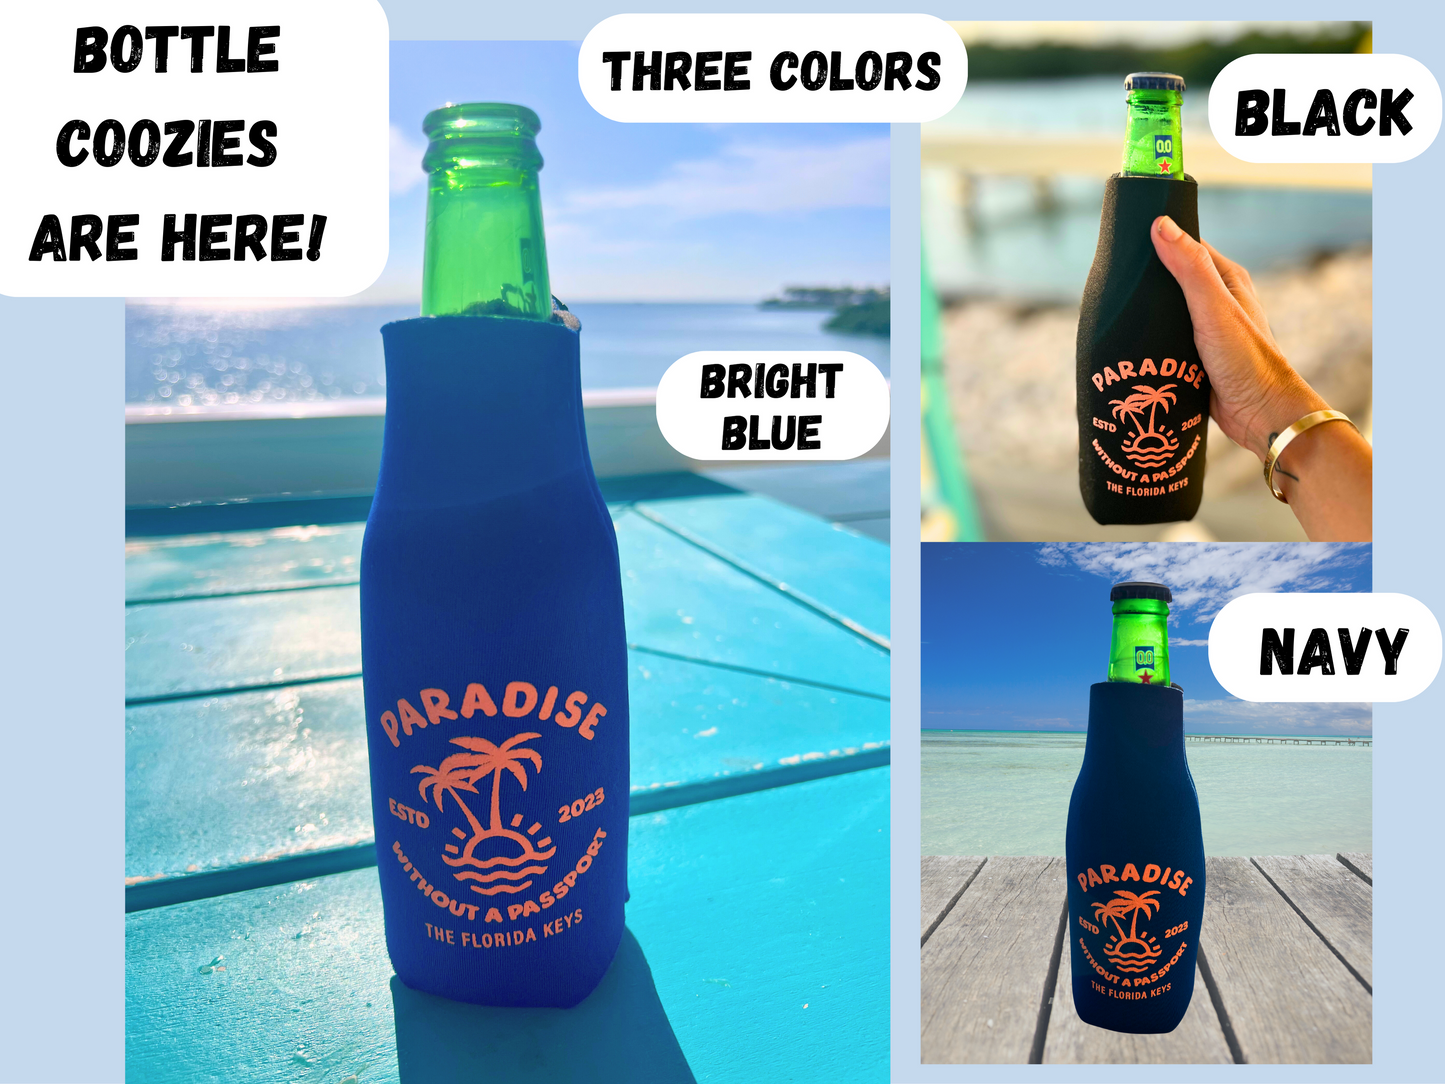 Florida Keys Bottle Coozies - "paradise without a passport" blue, navy & black